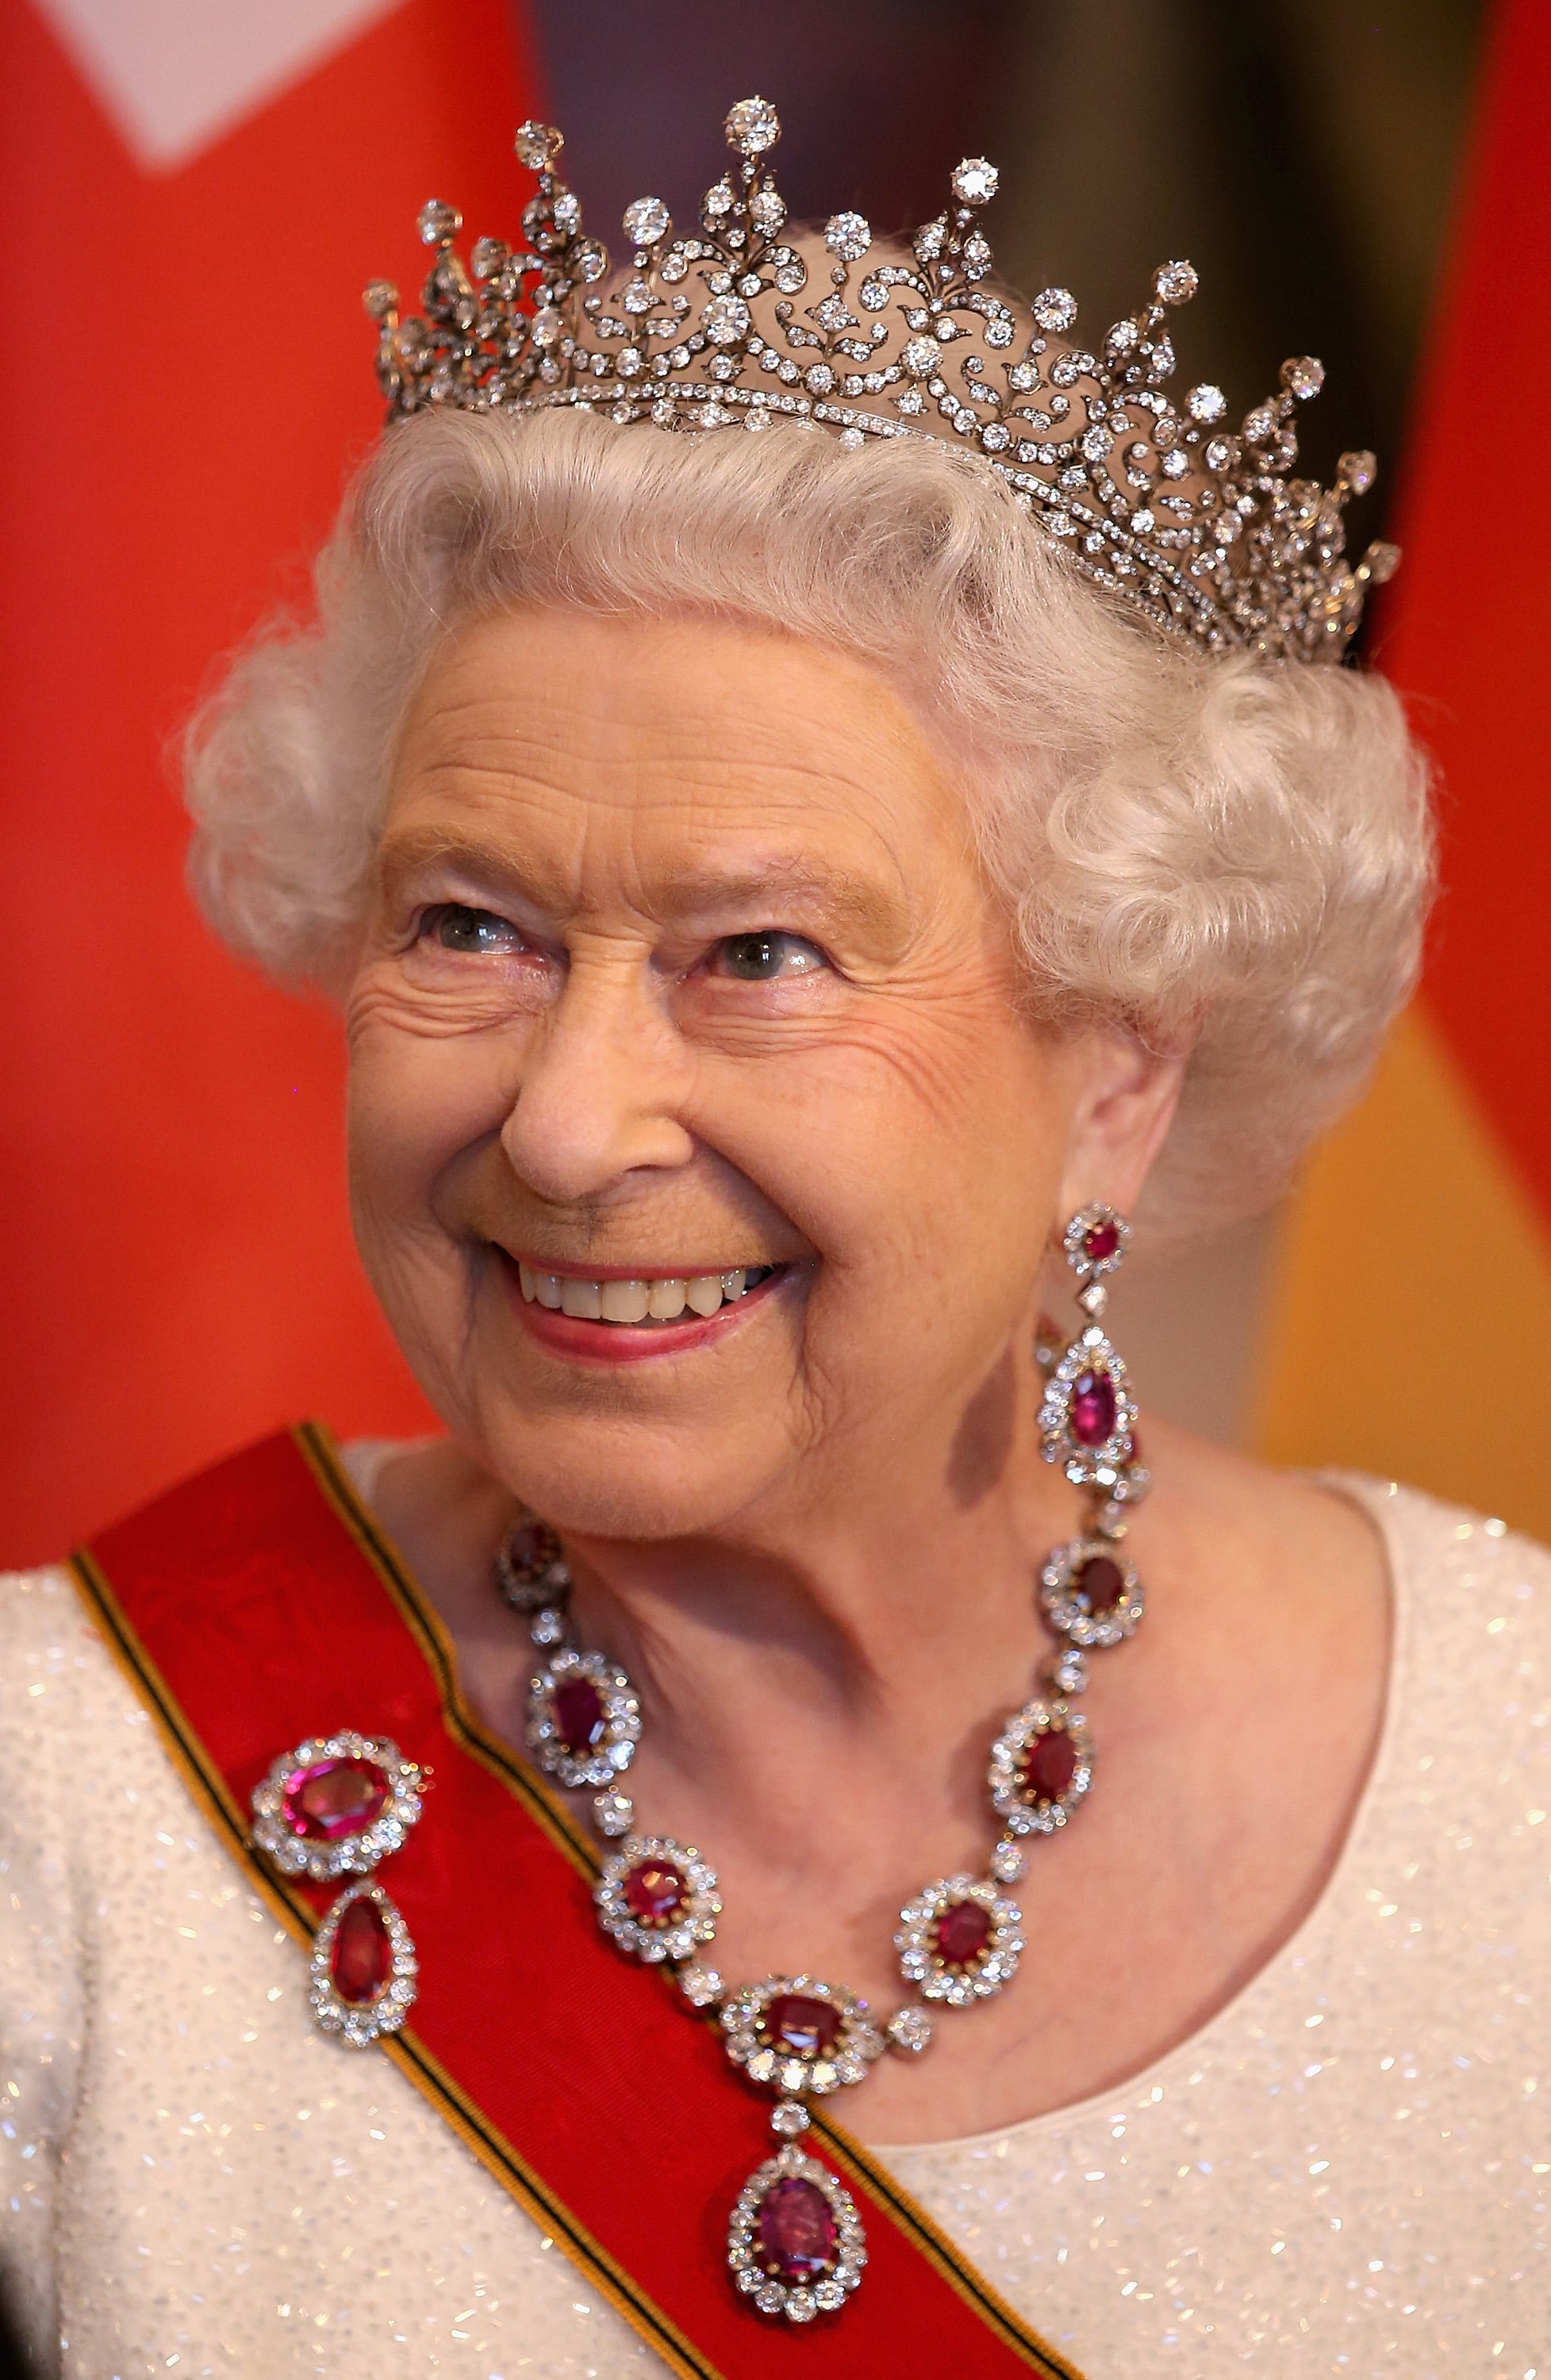 Queen Elizabeth II on a state visit to Germany in 2015